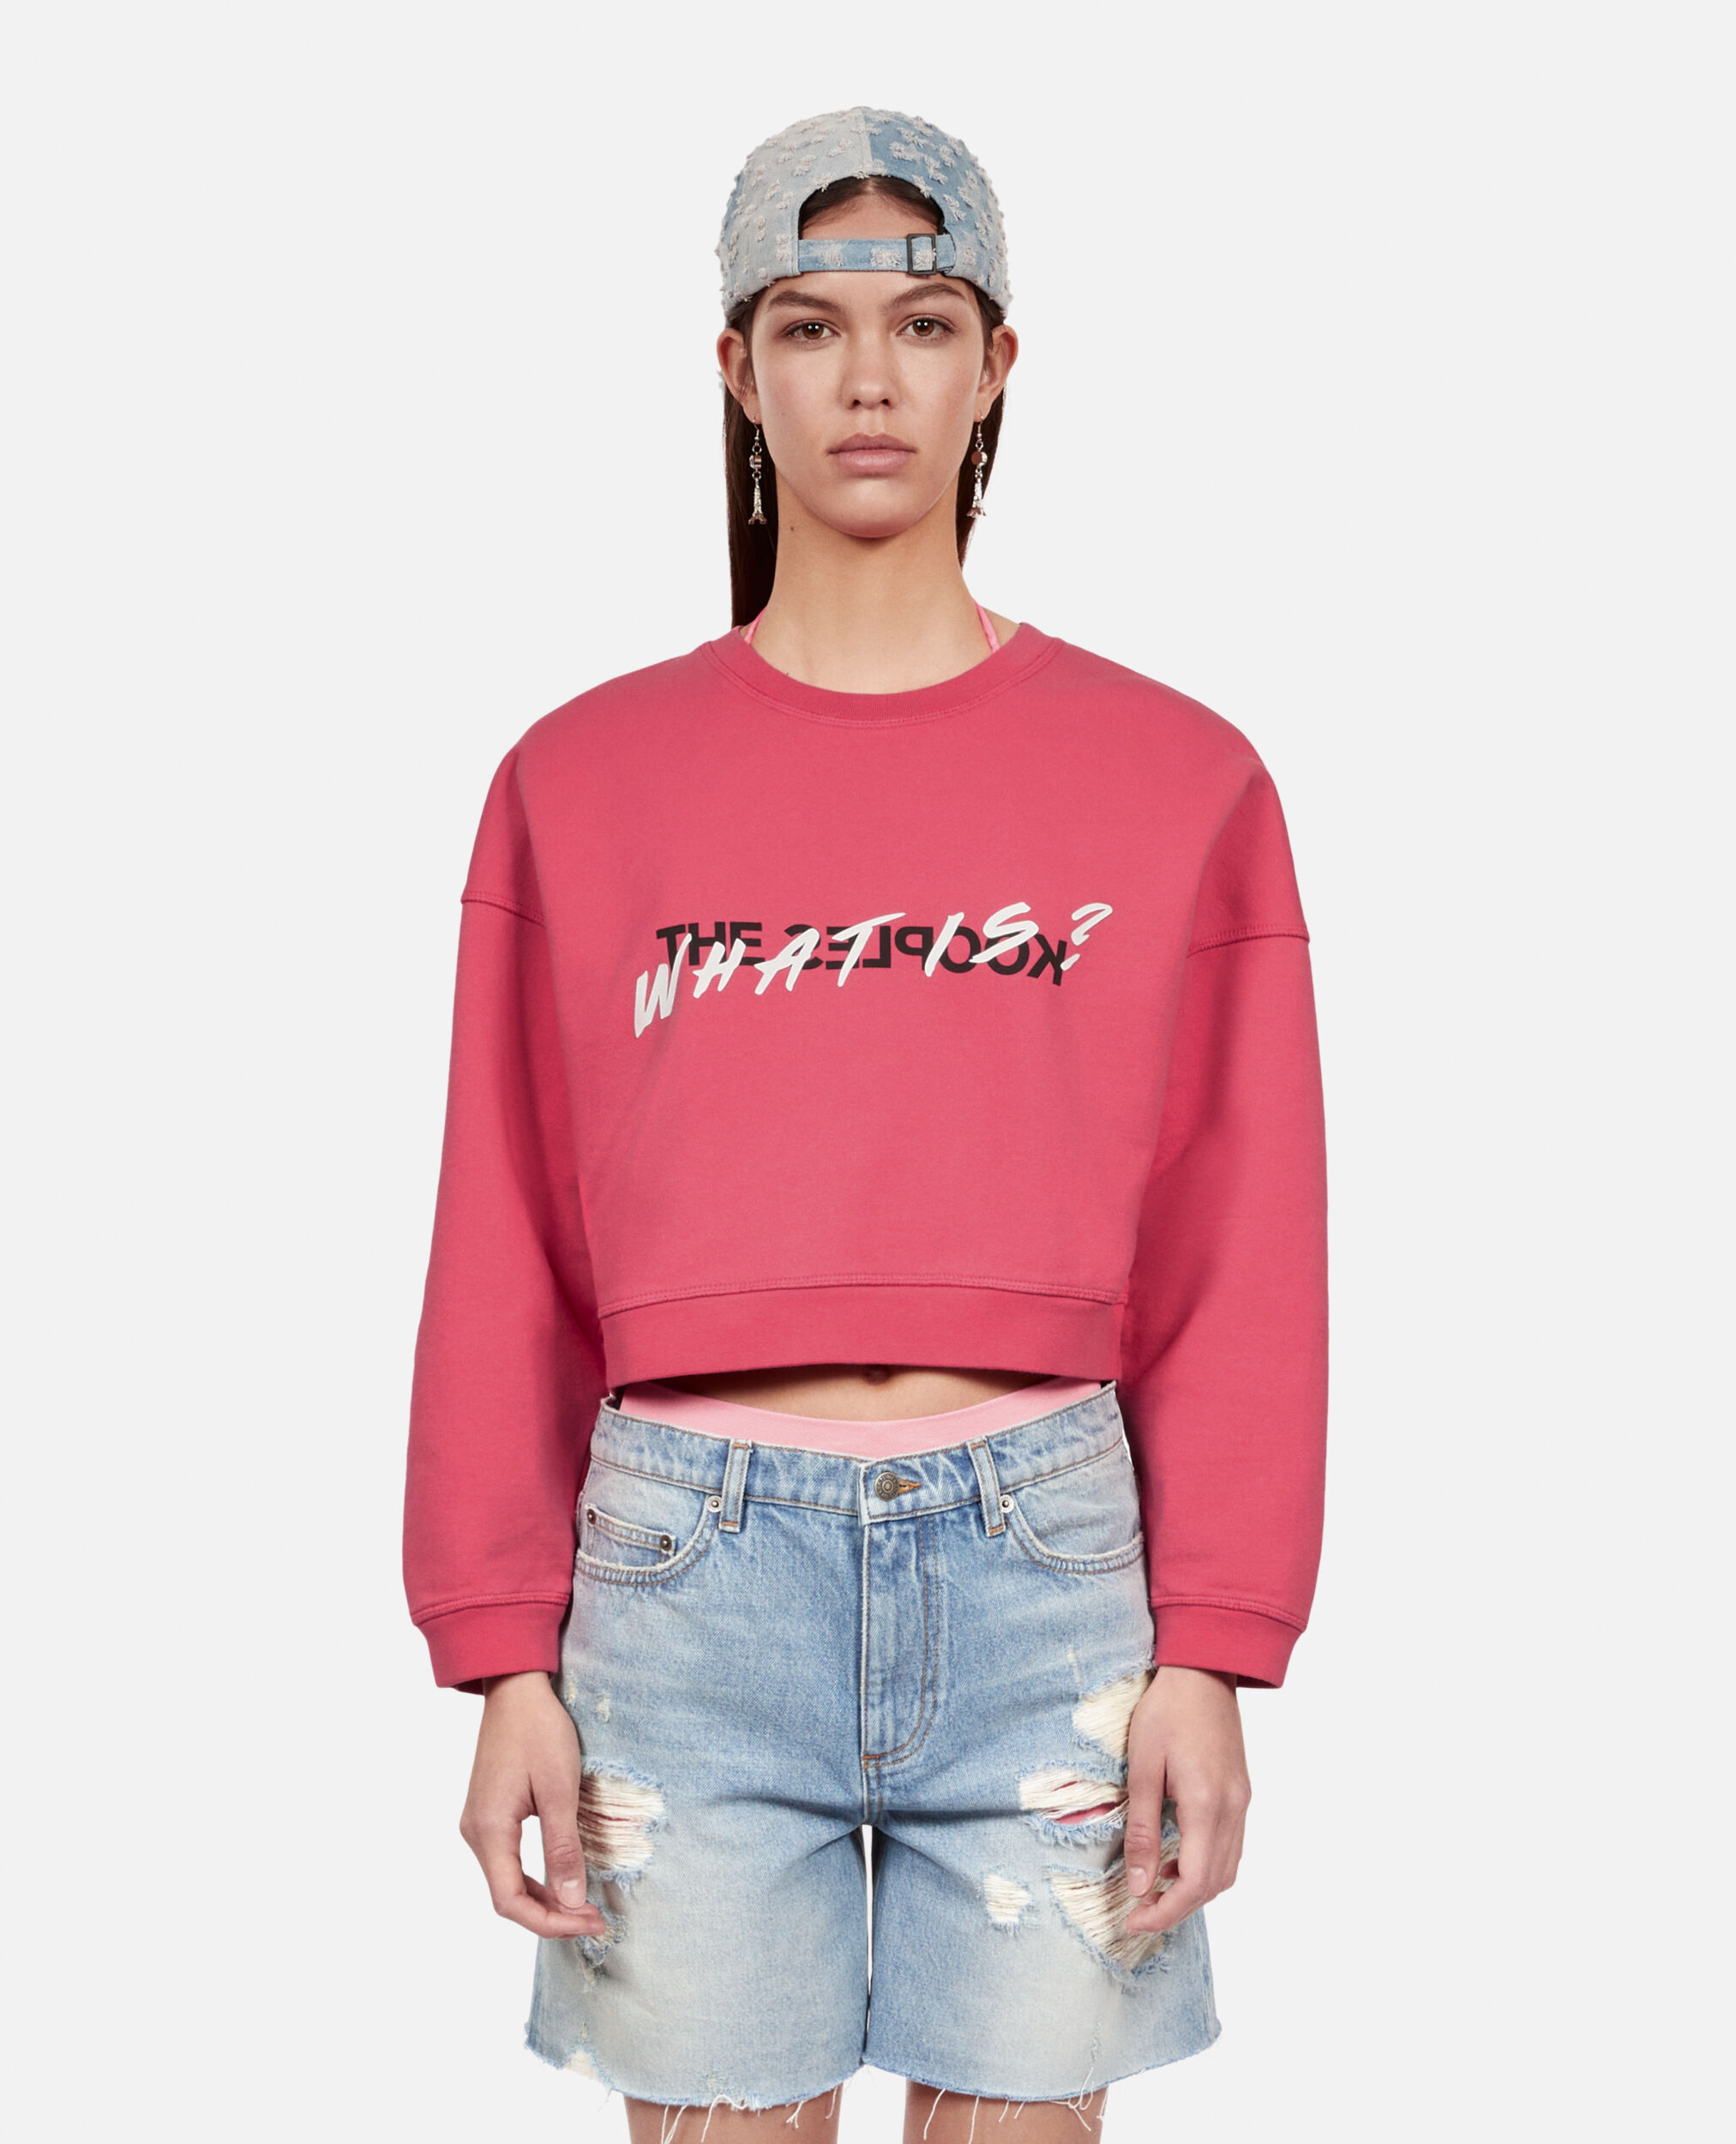 Sweatshirt What is court fuchsia, RETRO PINK, hi-res image number null